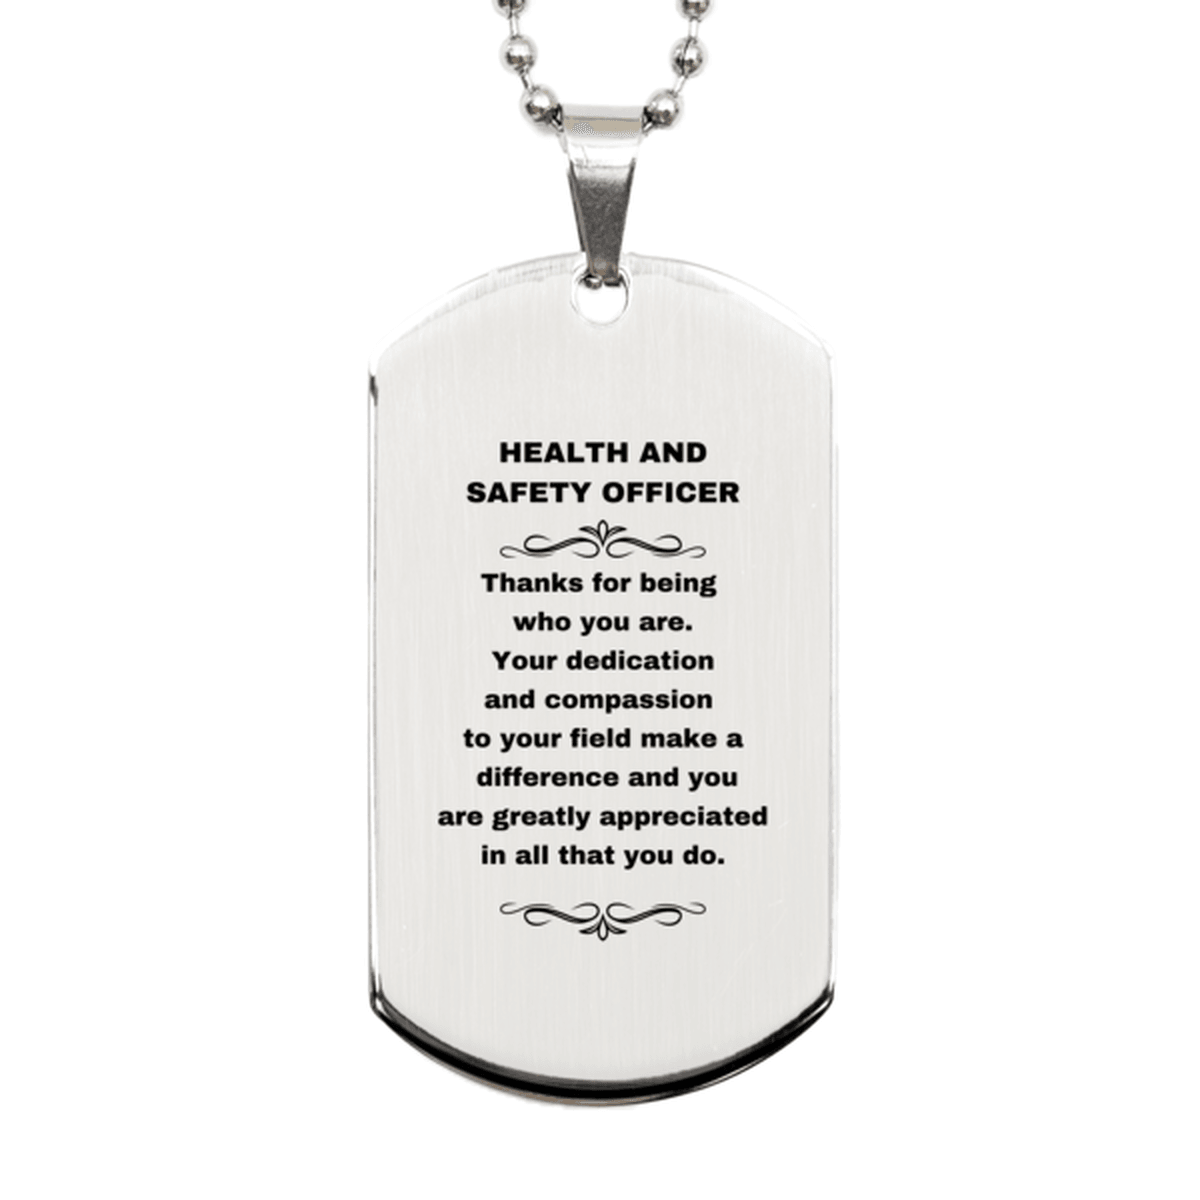 Health and Safety Officer Silver Dog Tag Necklace Engraved Bracelet - Thanks for being who you are - Birthday Christmas Jewelry Gifts Coworkers Colleague Boss - Mallard Moon Gift Shop